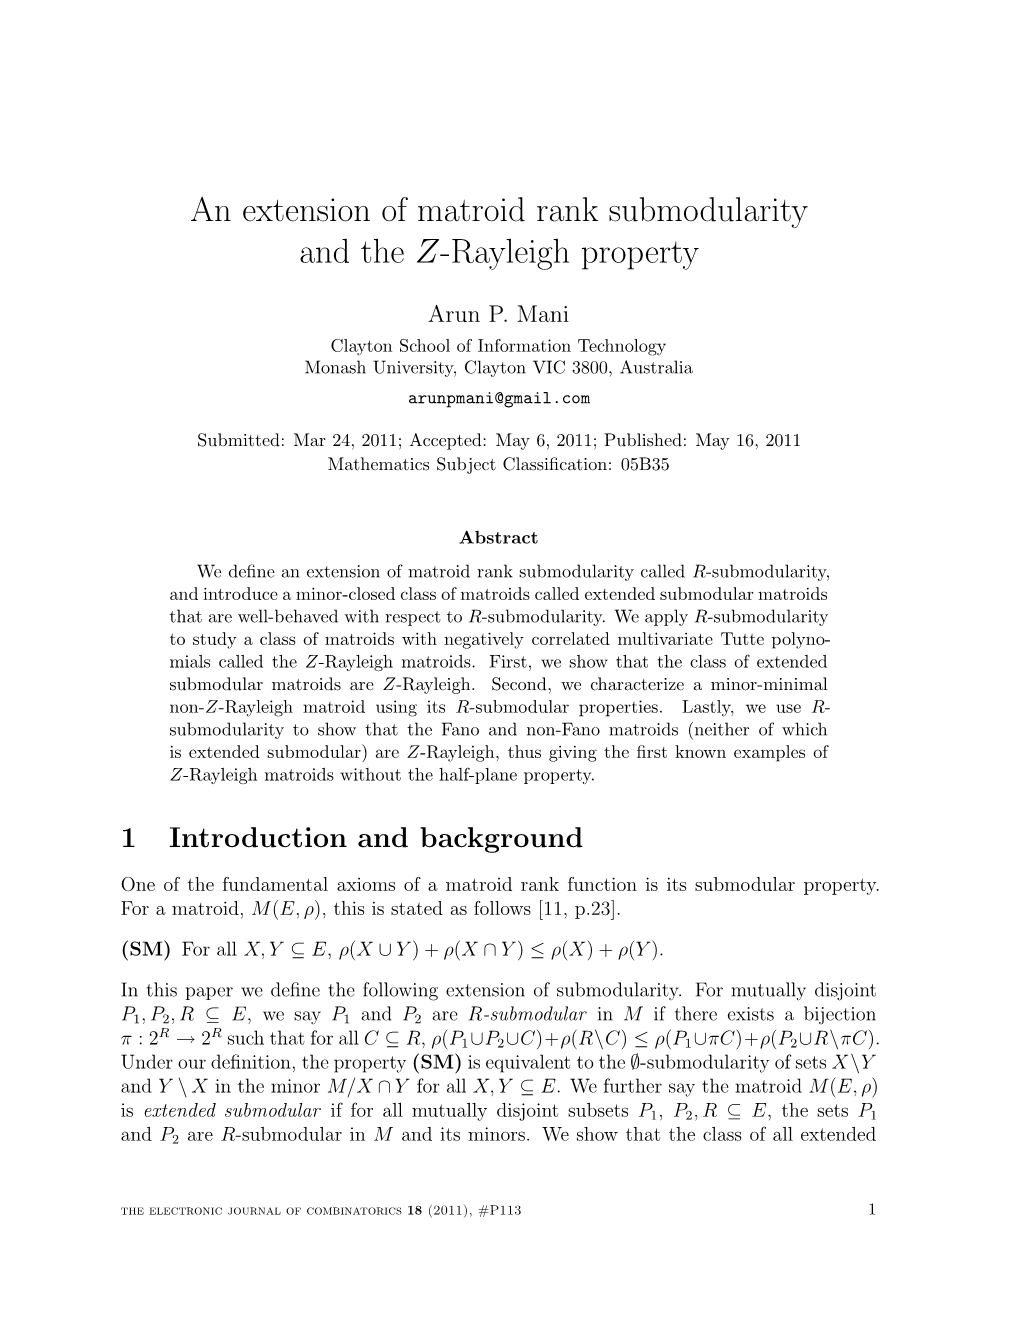 An Extension of Matroid Rank Submodularity and the Z-Rayleigh Property